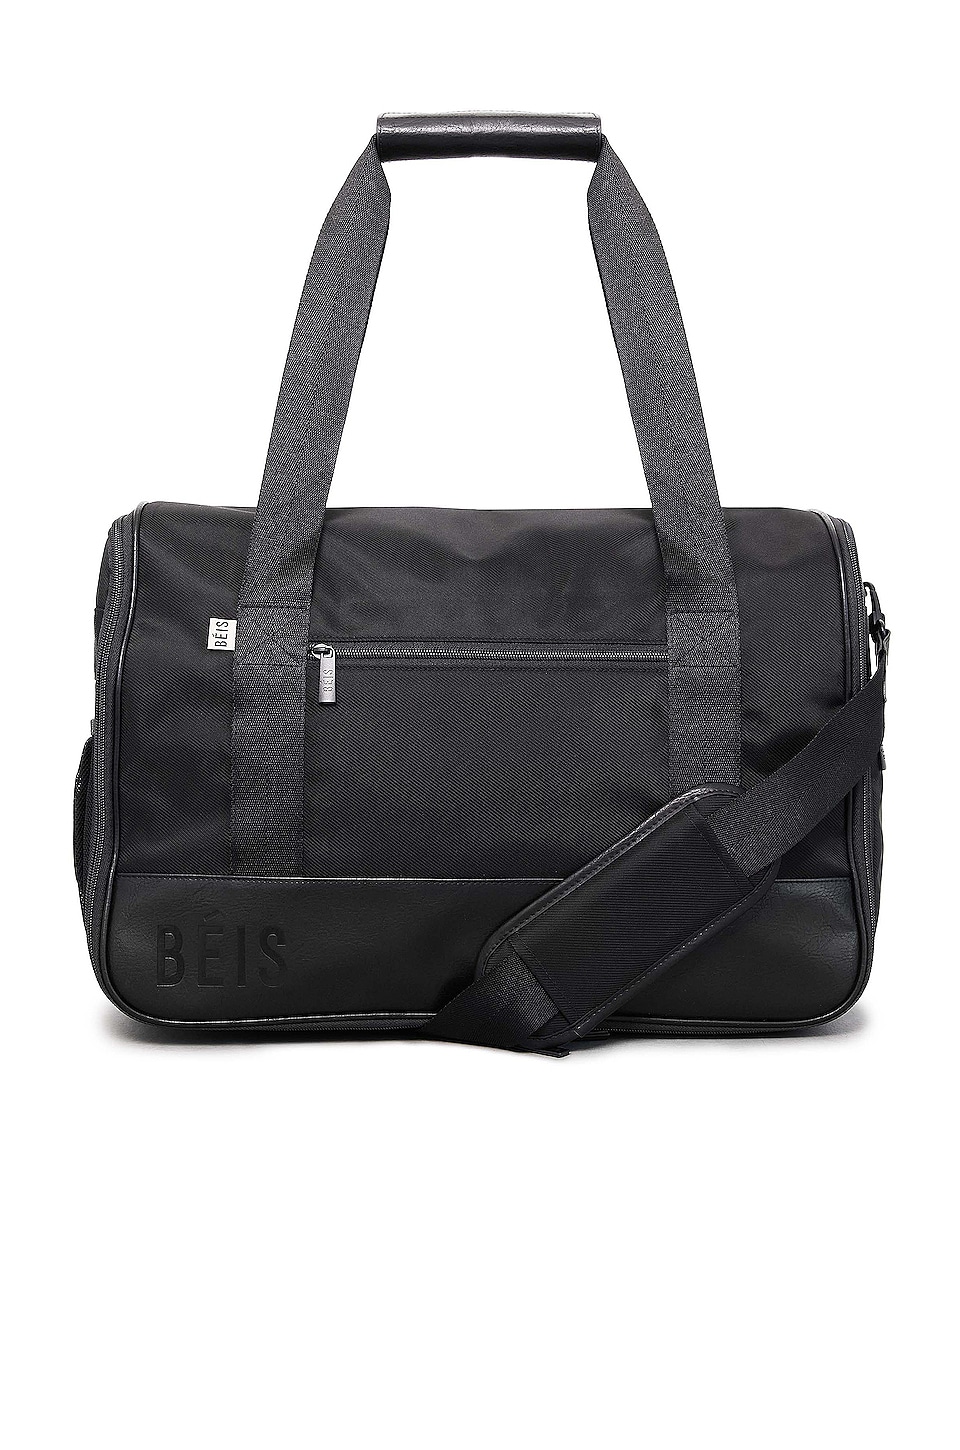 Revolve Accessories Bags Luggage The Hanging Backpack in Black. 